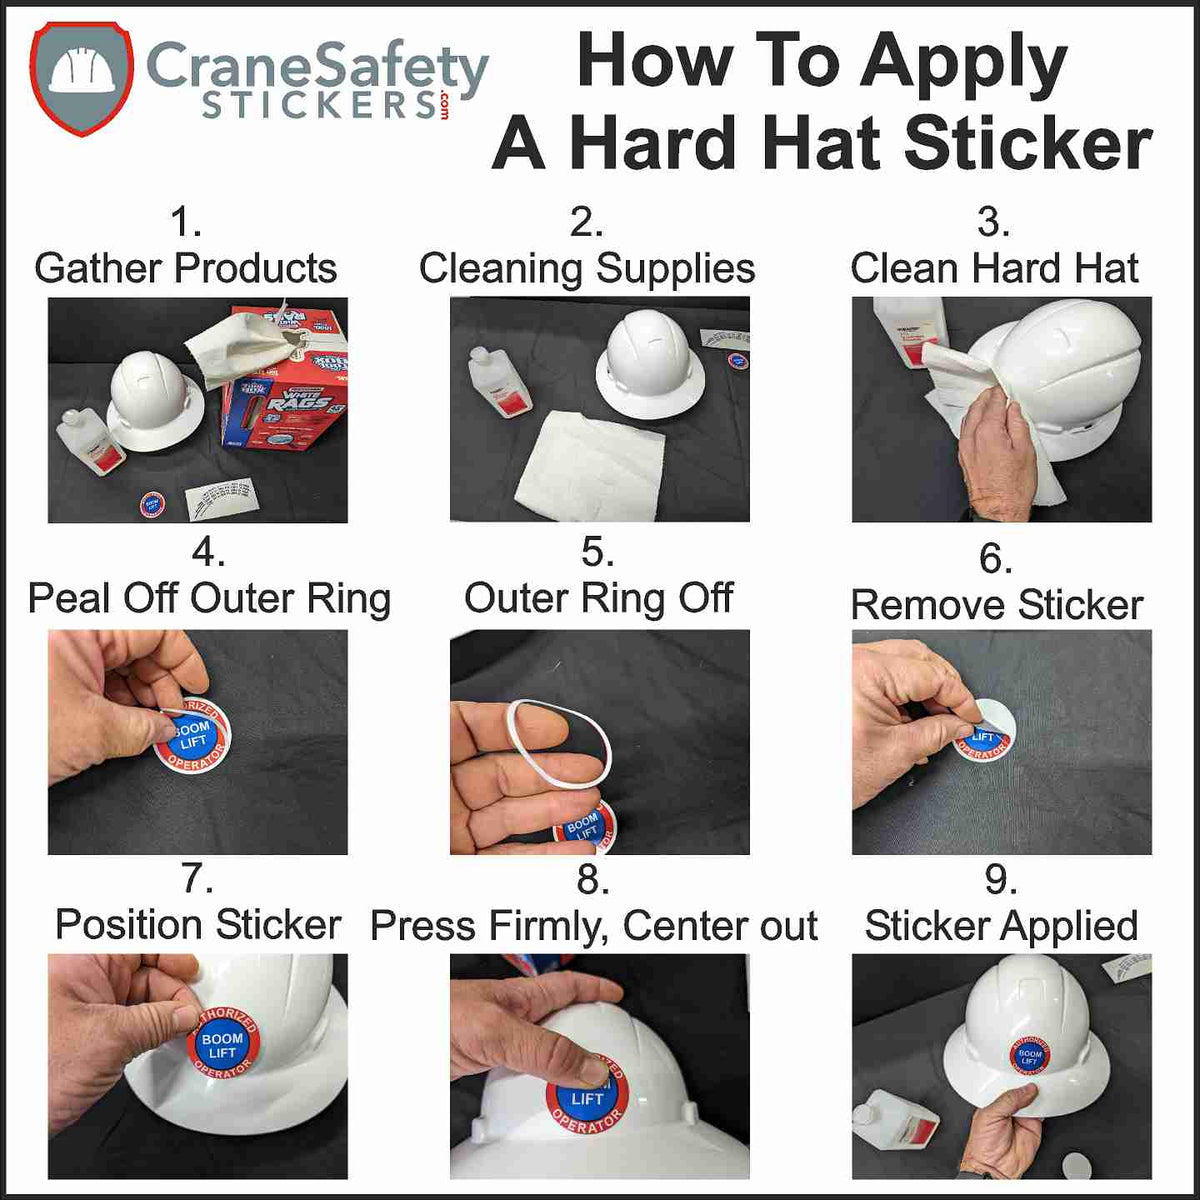 Directions on how to apply a safe worker one year injury free sticker to a hard hat.